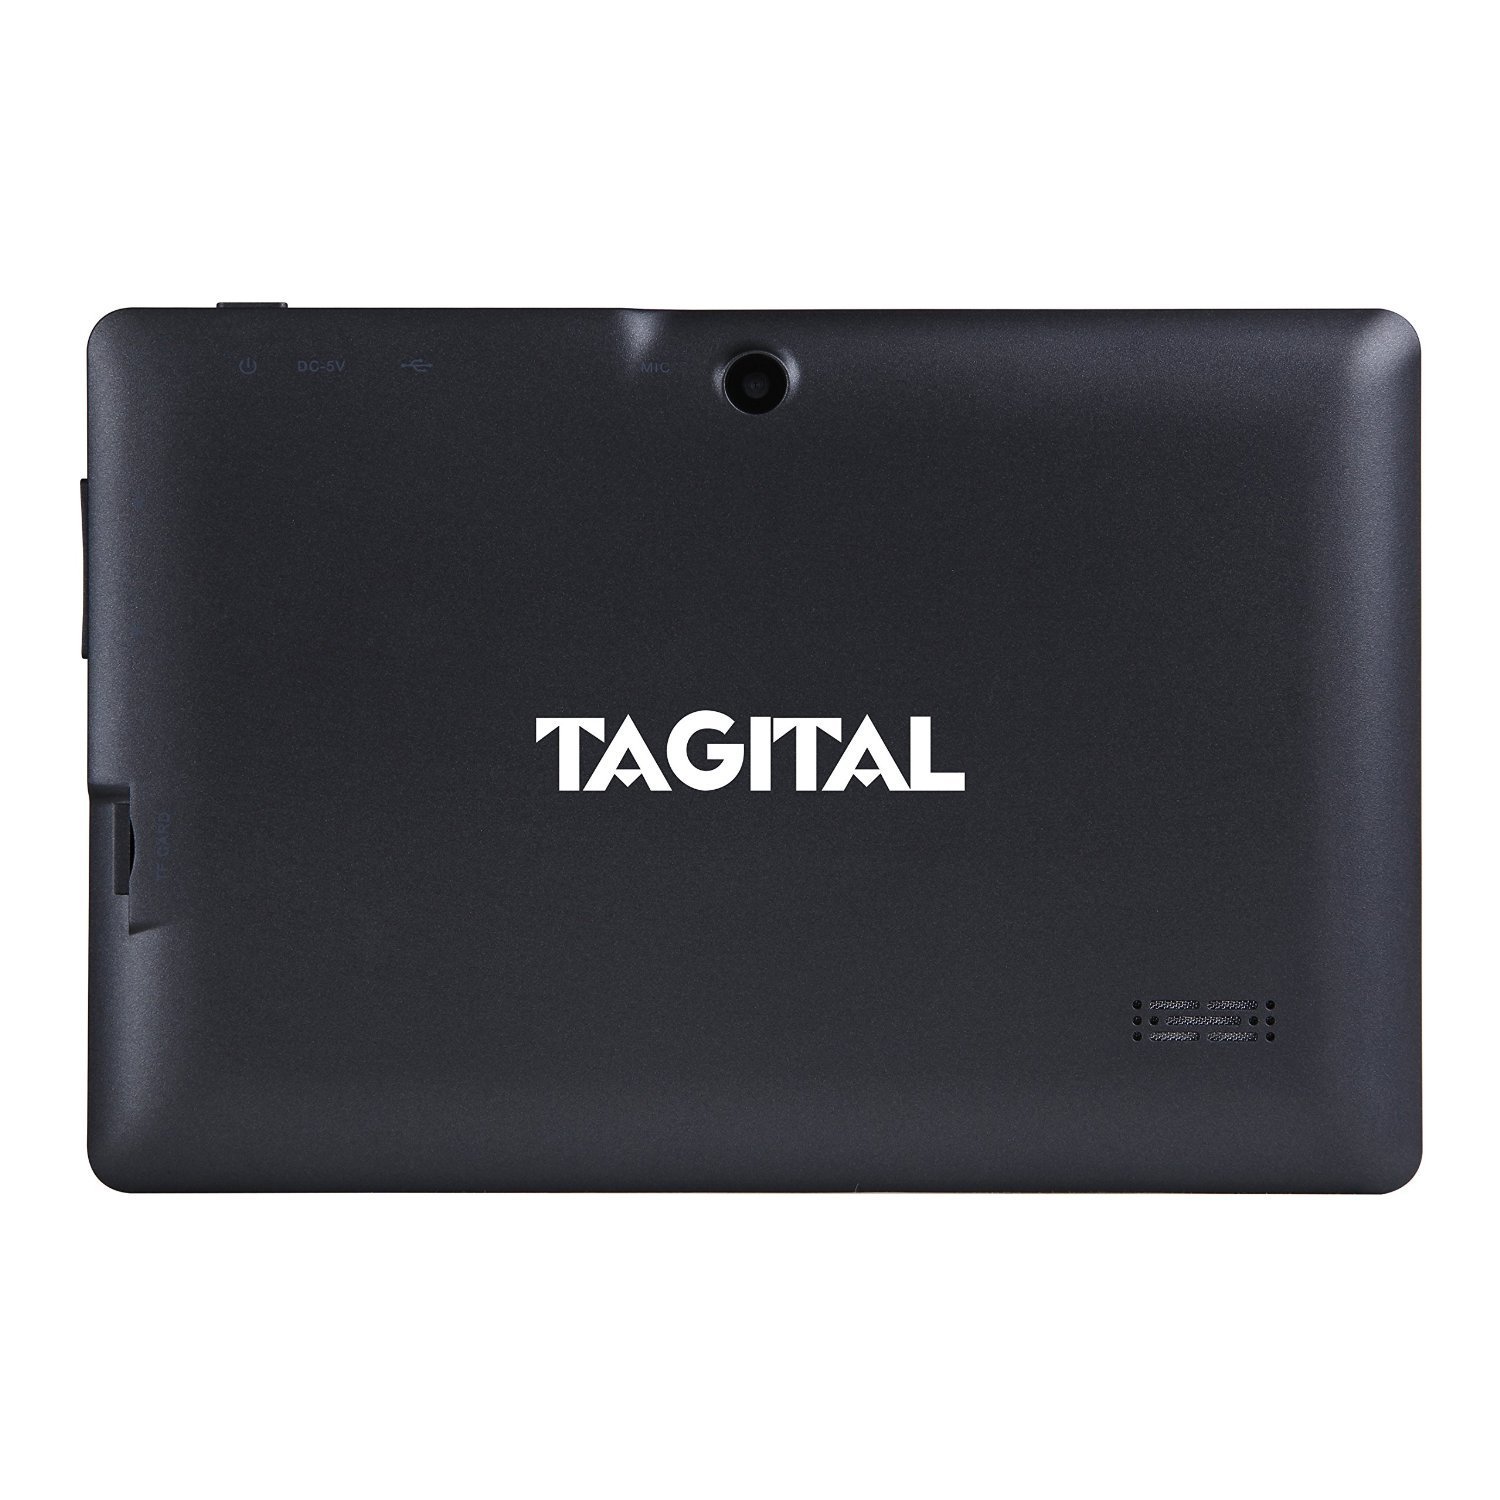 Tagital T7X 7" Quad Core Android Tablet PC Bundled with Keyboard Case - image 4 of 8